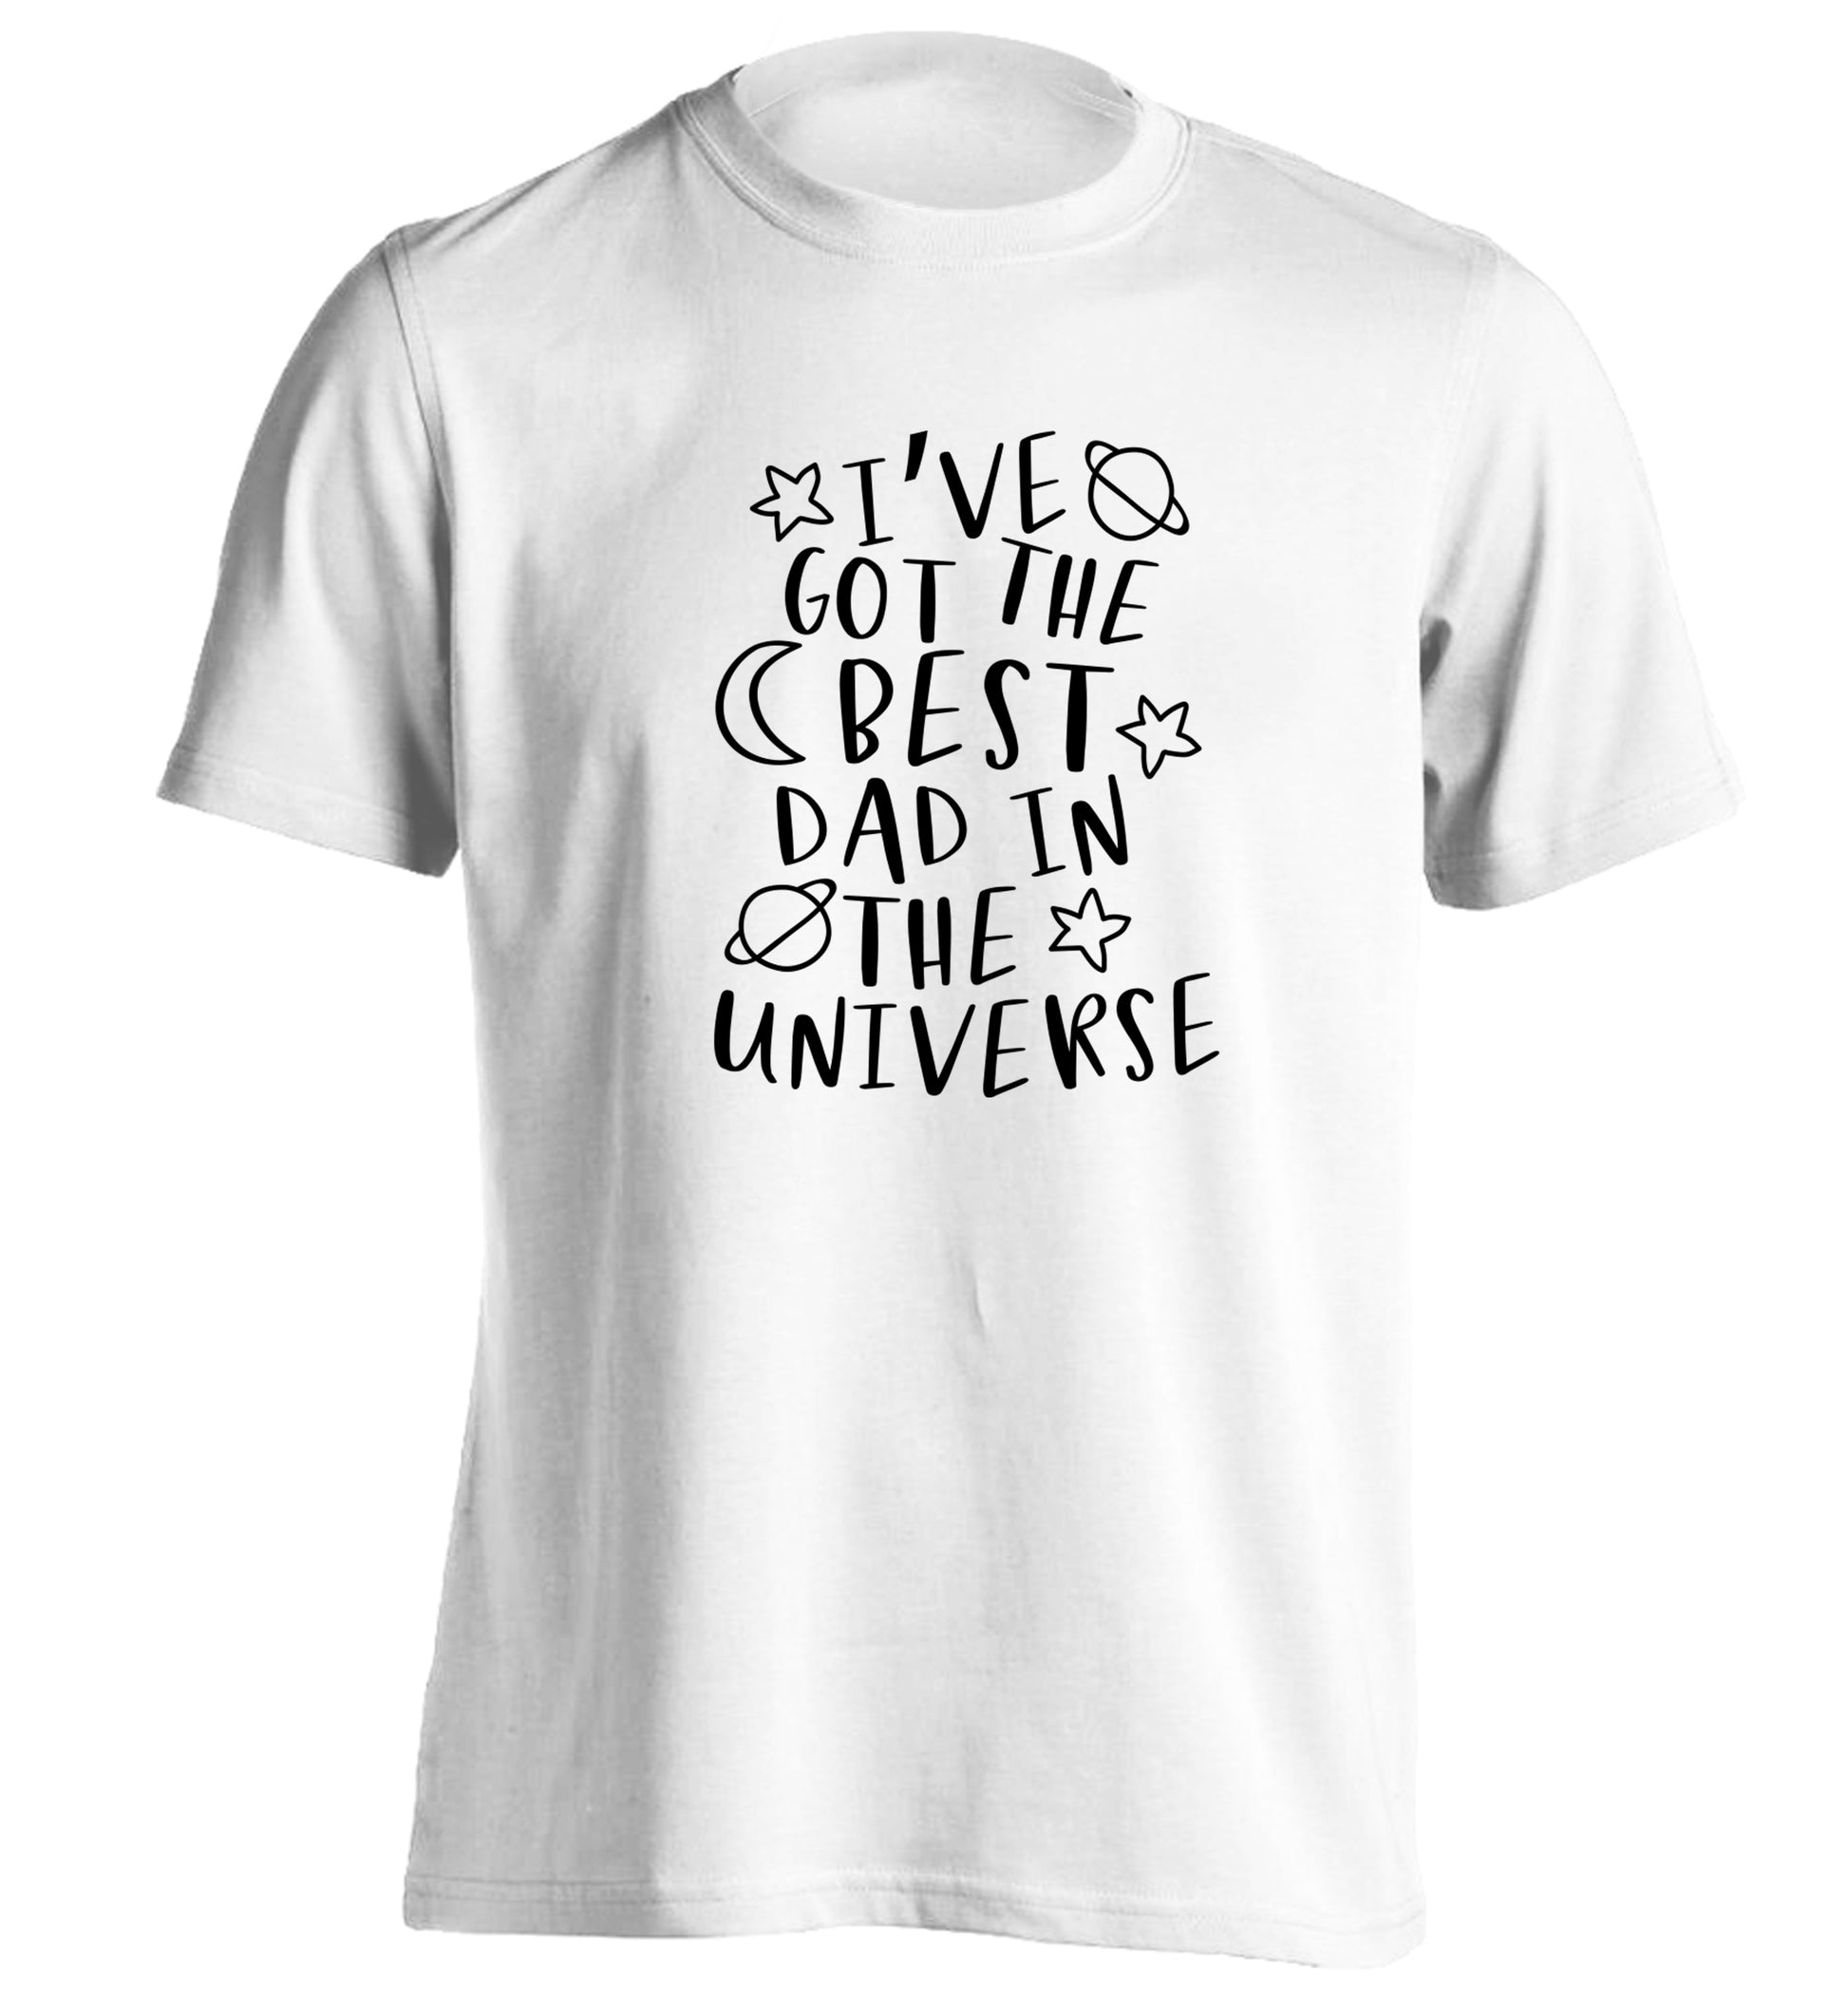 I've got the best dad in the universe adults unisex white Tshirt 2XL